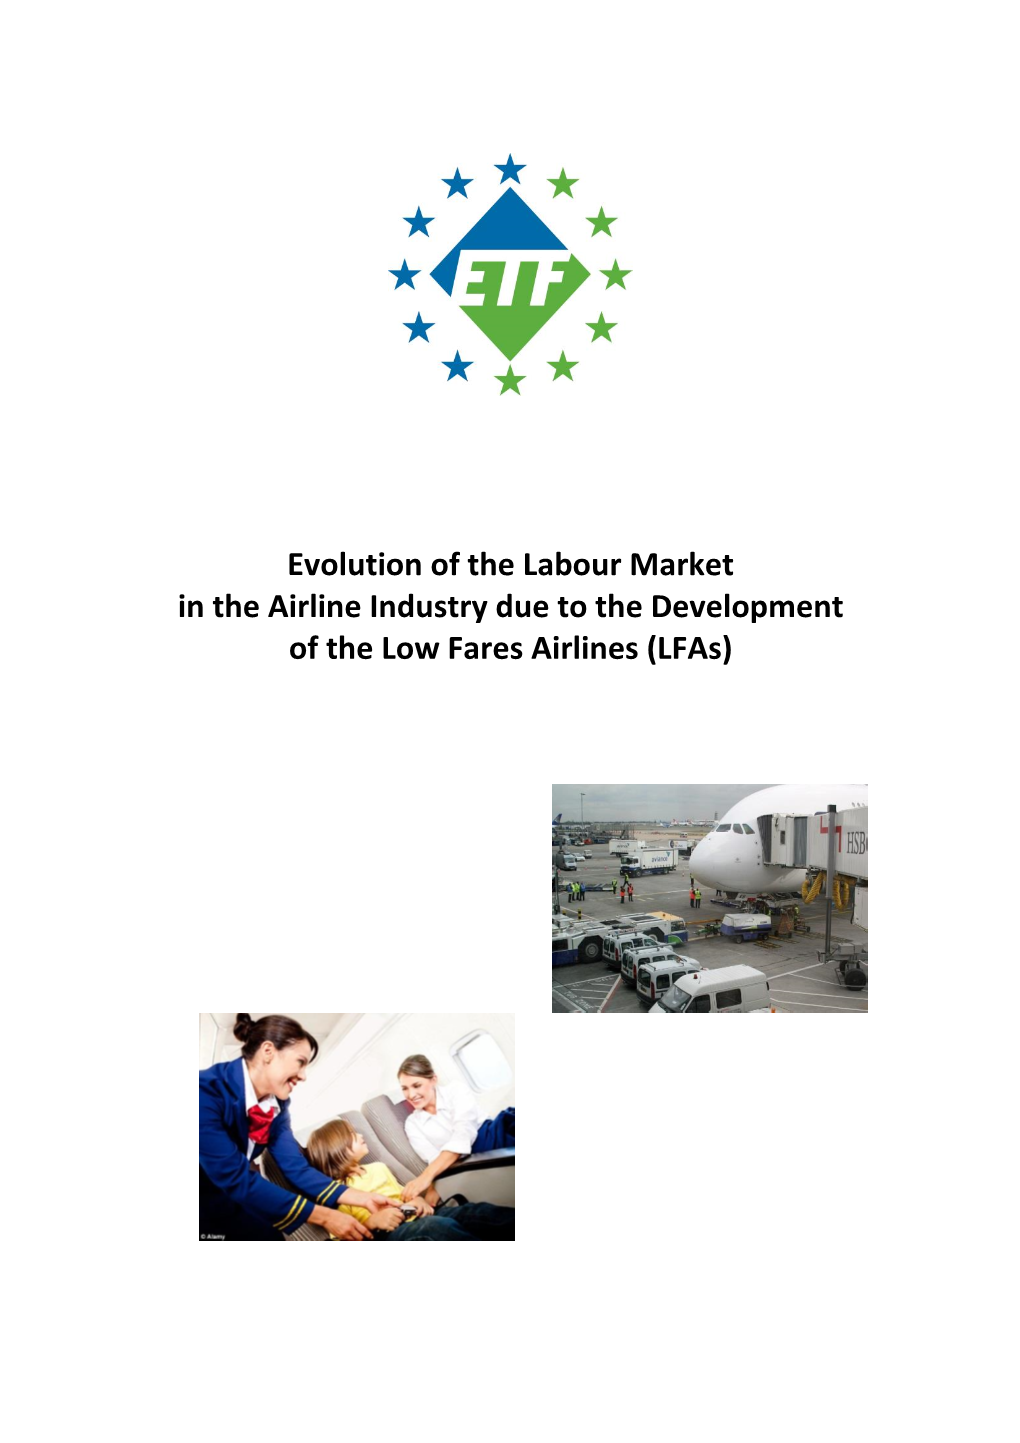 Evolution of the Labour Market in the Airline Industry Due to the Development of the Low Fares Airlines (Lfas)